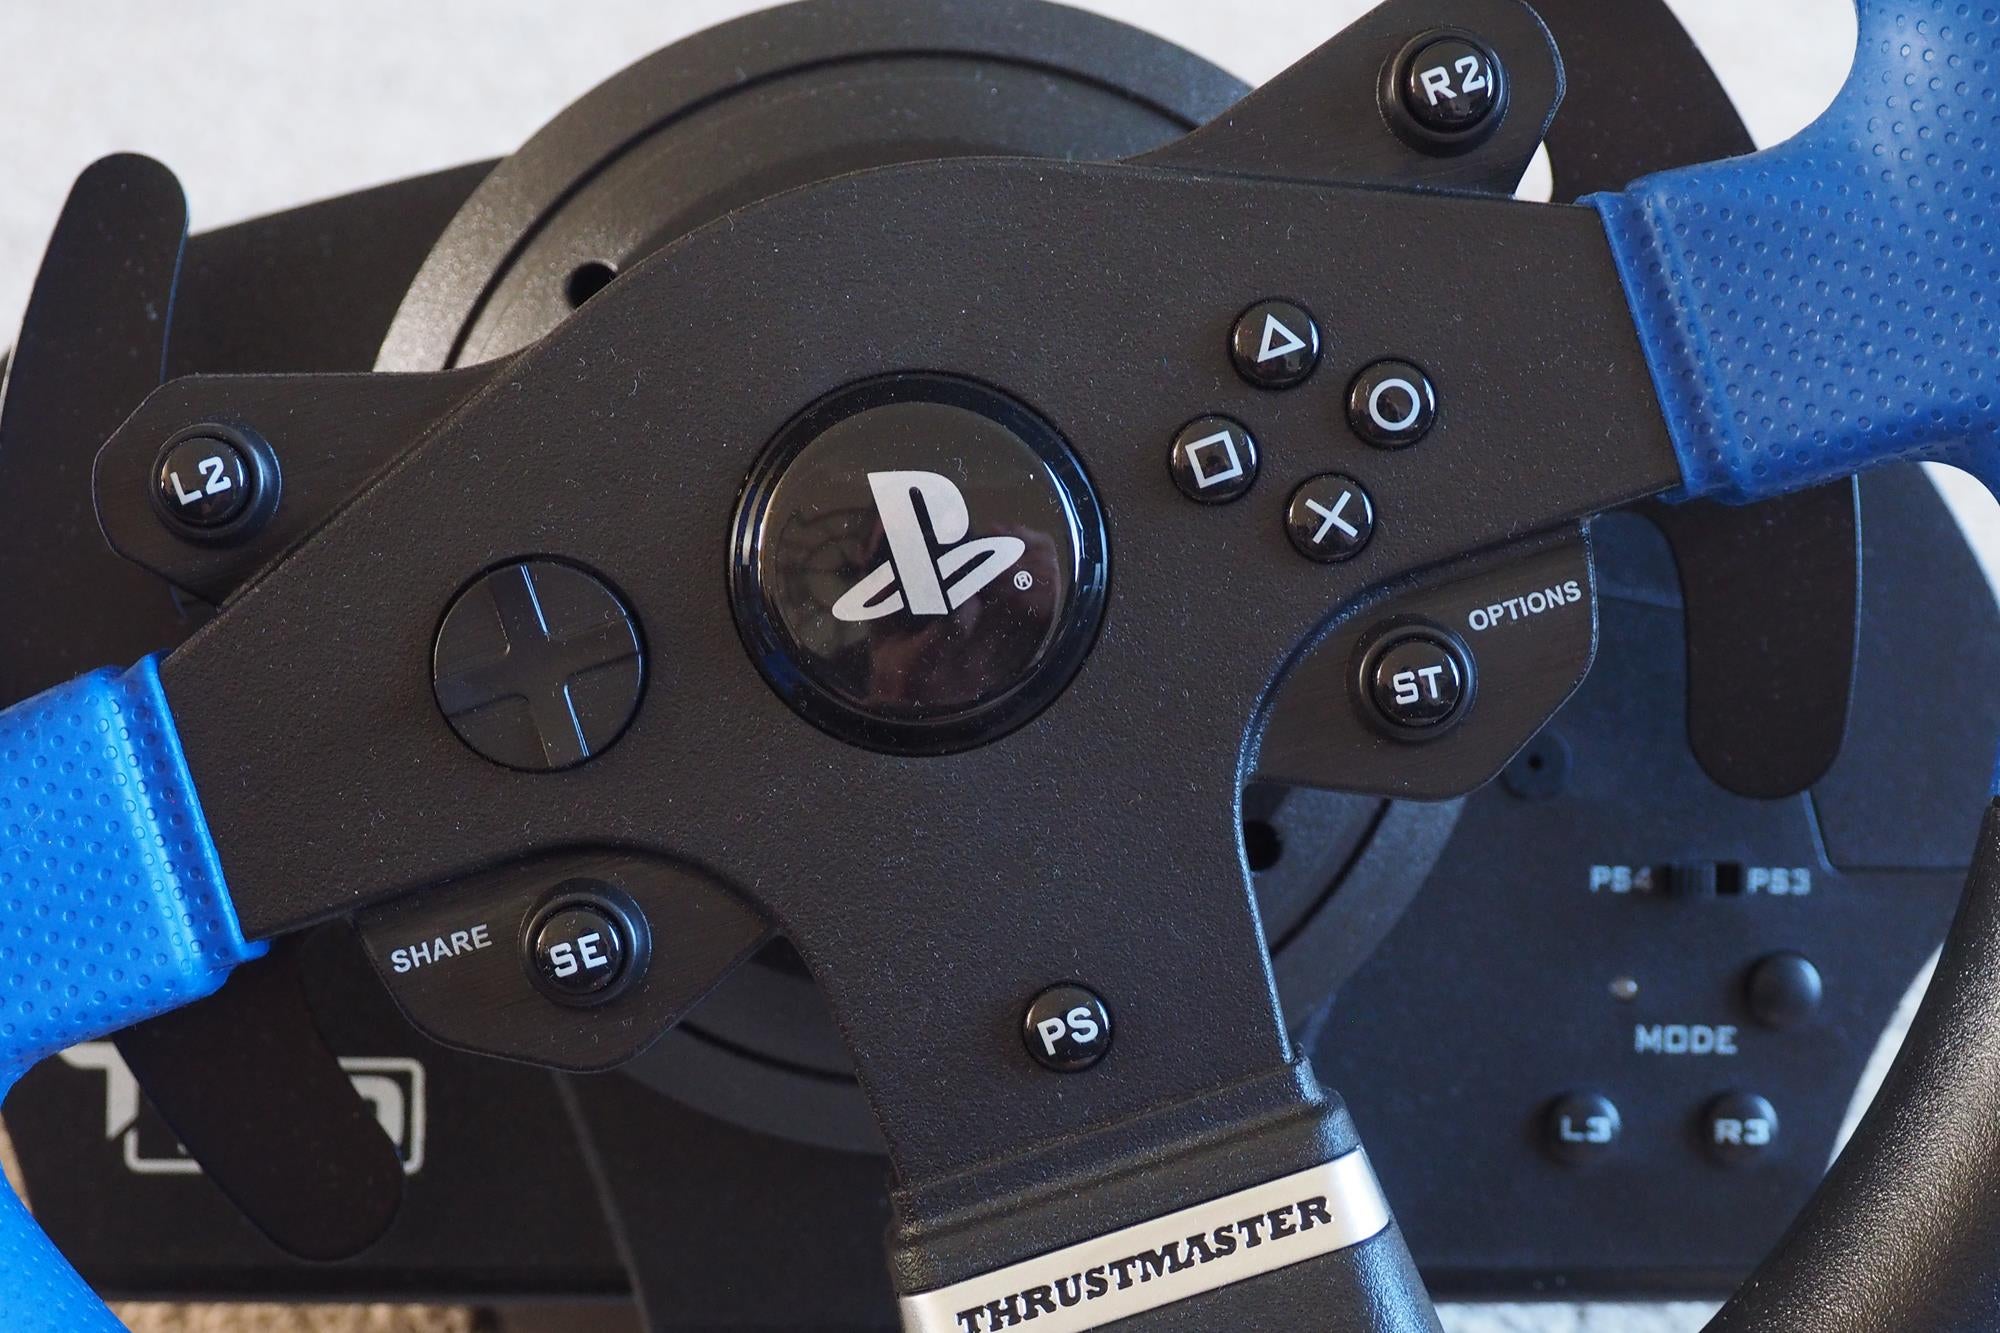 Thrustmaster T150 Pro Review | Trusted Reviews